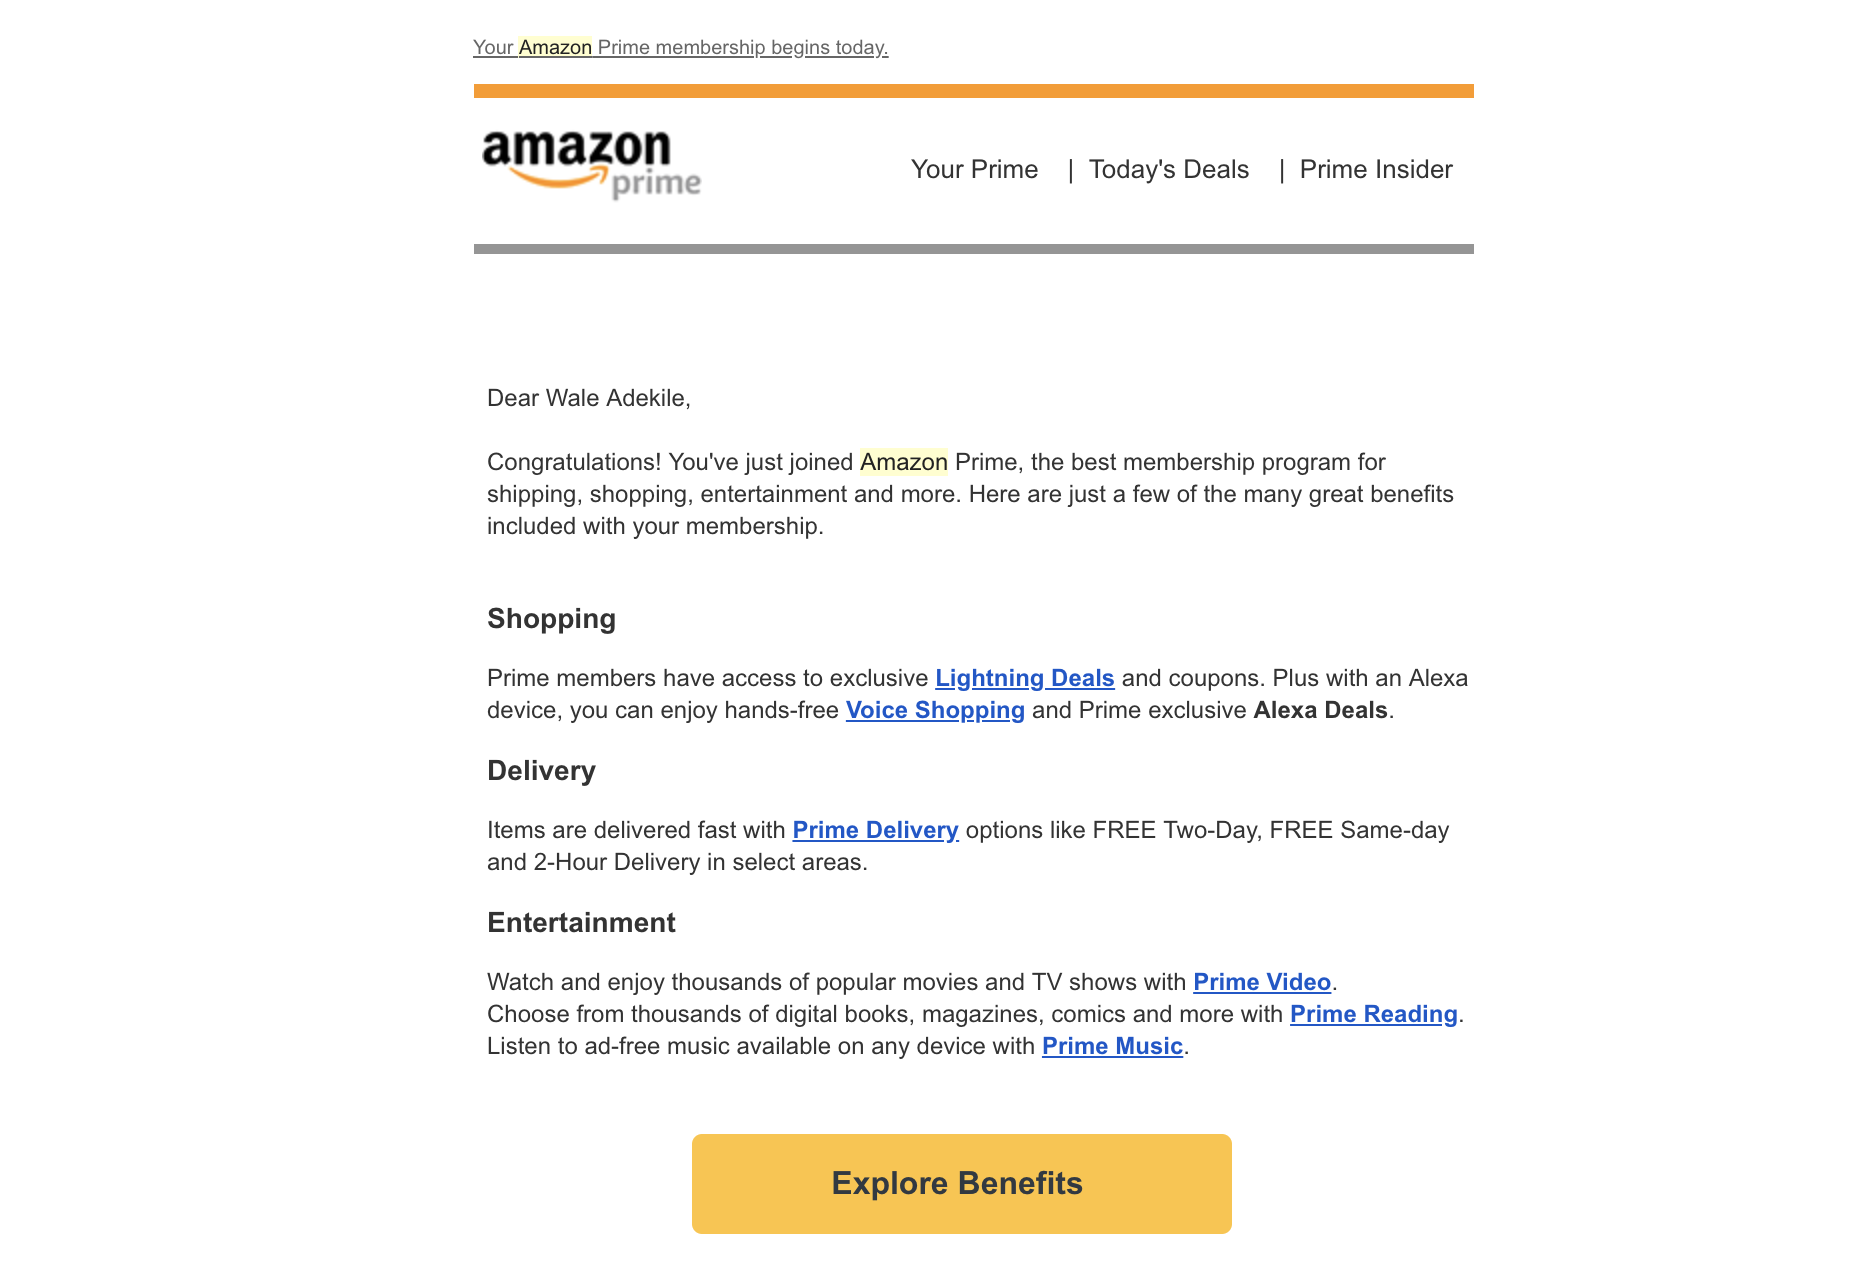 How To Pay For Amazon Prime Membership With Gift Card Balance